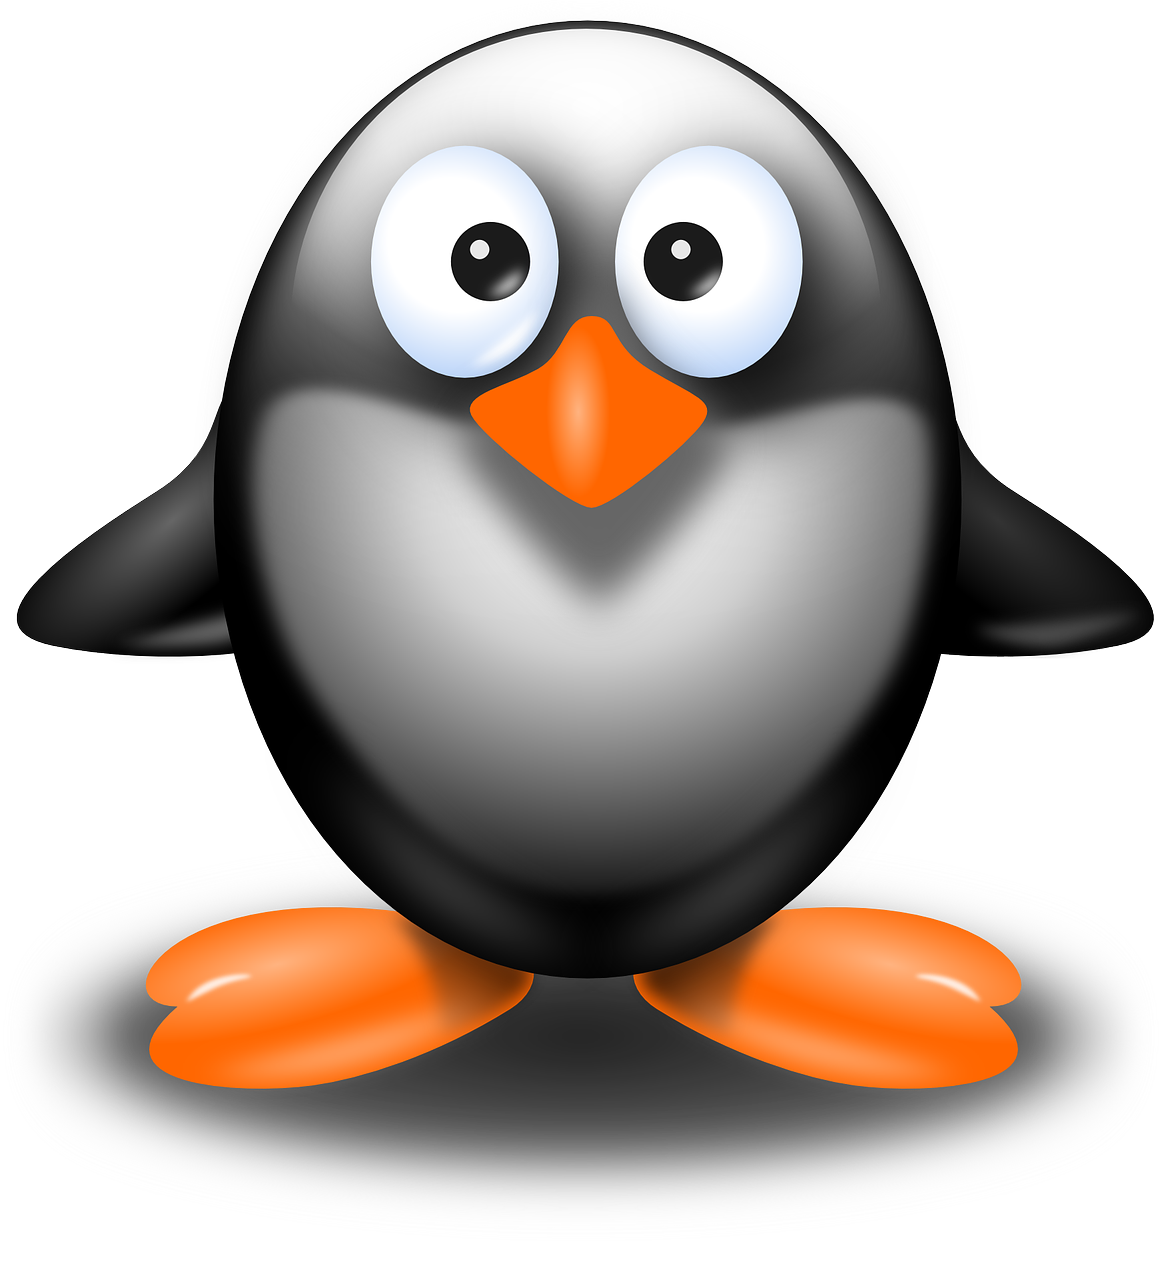 a black and white penguin with orange feet, an illustration of, computer art, shiny silver, cross-eyed, screensaver, round